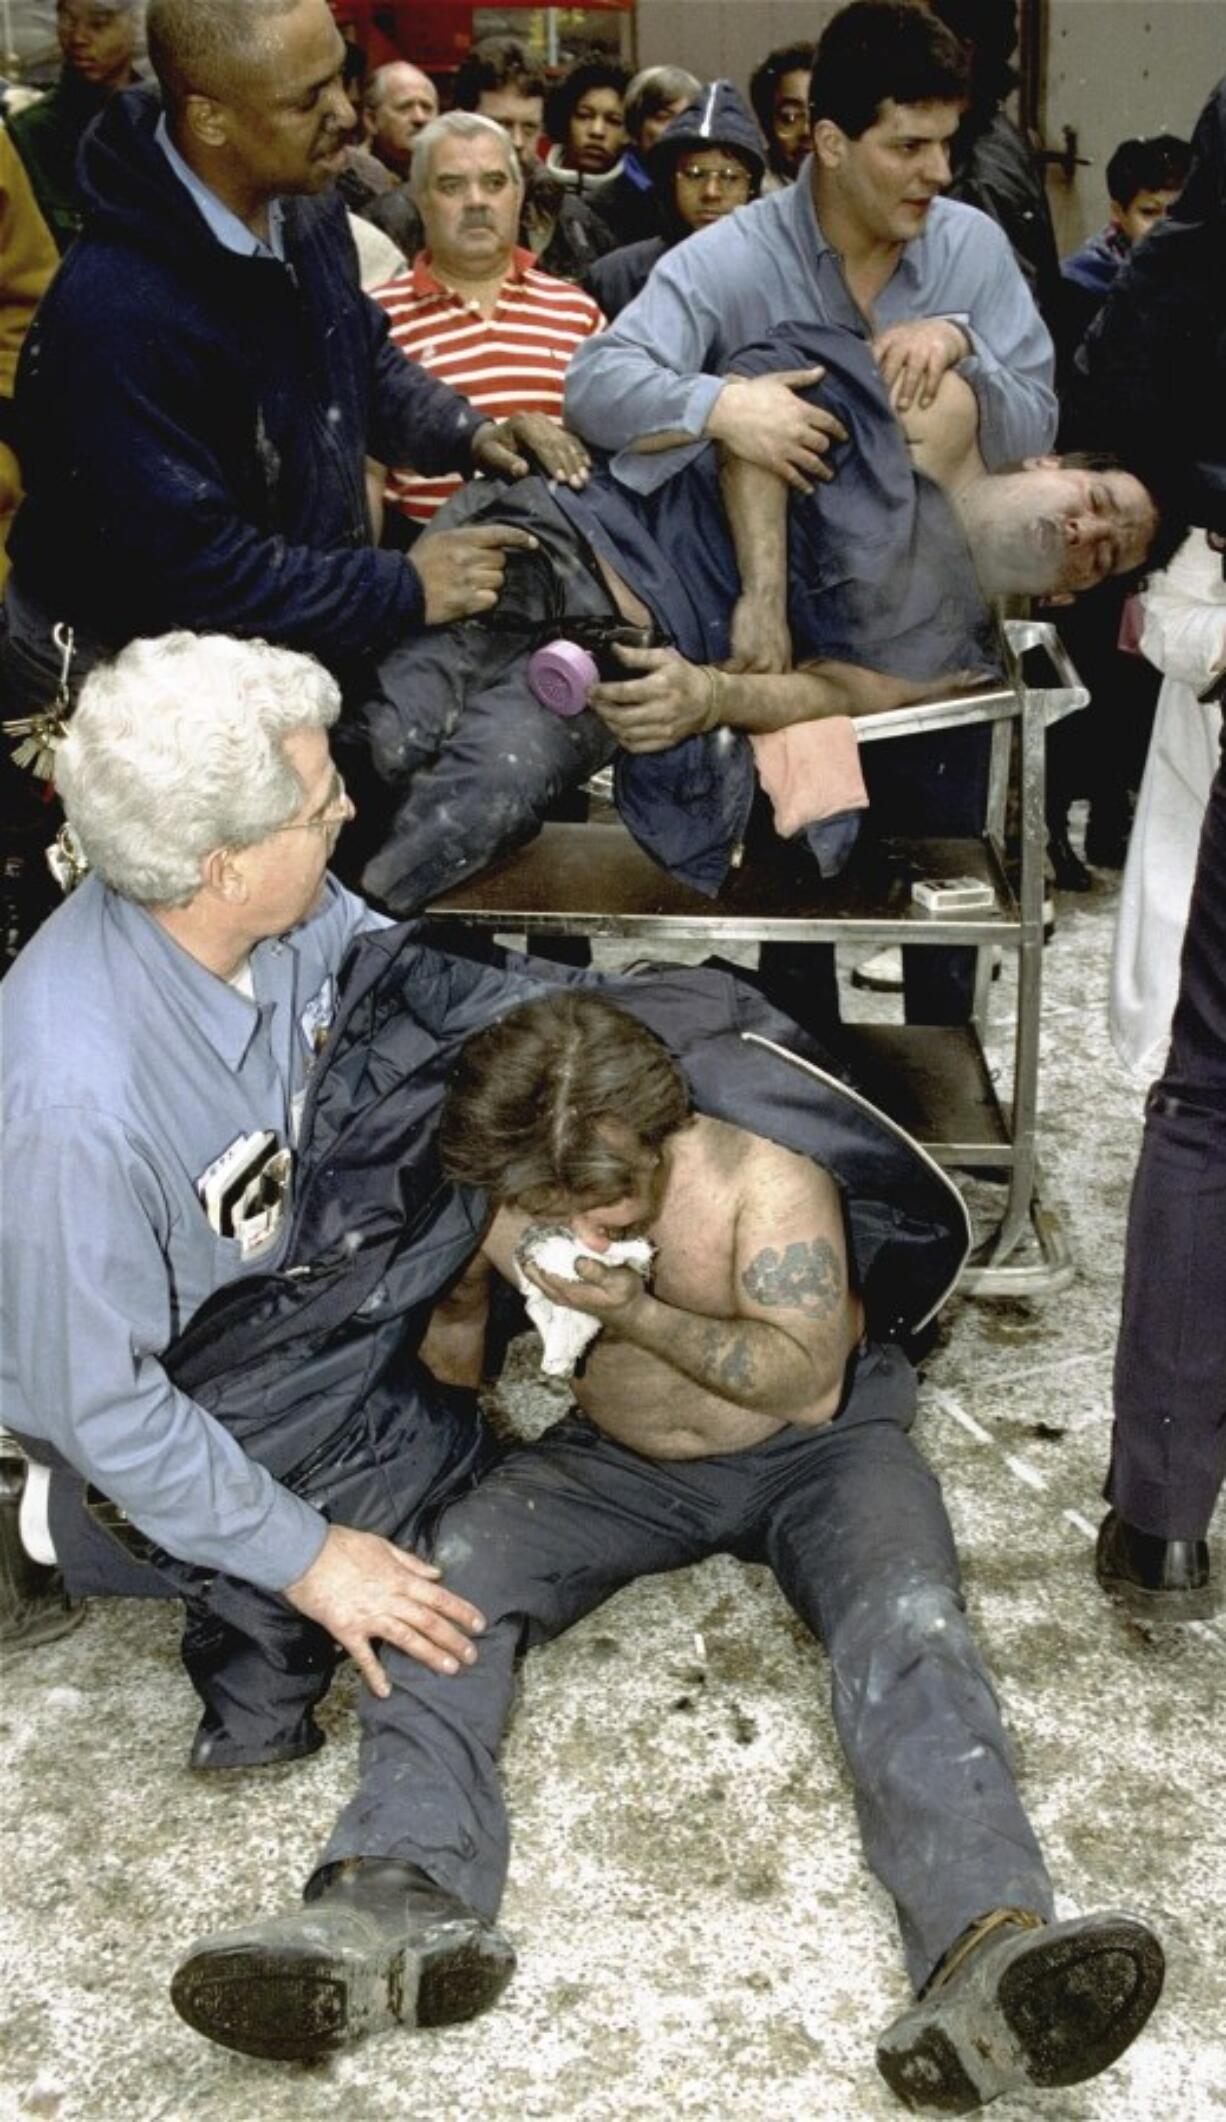 FILE - Victims of a fire at the World Trade Center in New York are treated at the scene, Feb. 26, 1993. New York City is marking the anniversary of the 1993 bombing that blew apart a van parked in an underground garage, killing six people and injured more than 1,000. The Port Authority of New York and New Jersey is holding a memorial Mass on Monday, Feb. 26, 2024 at St. Peter&rsquo;s Church in Manhattan.